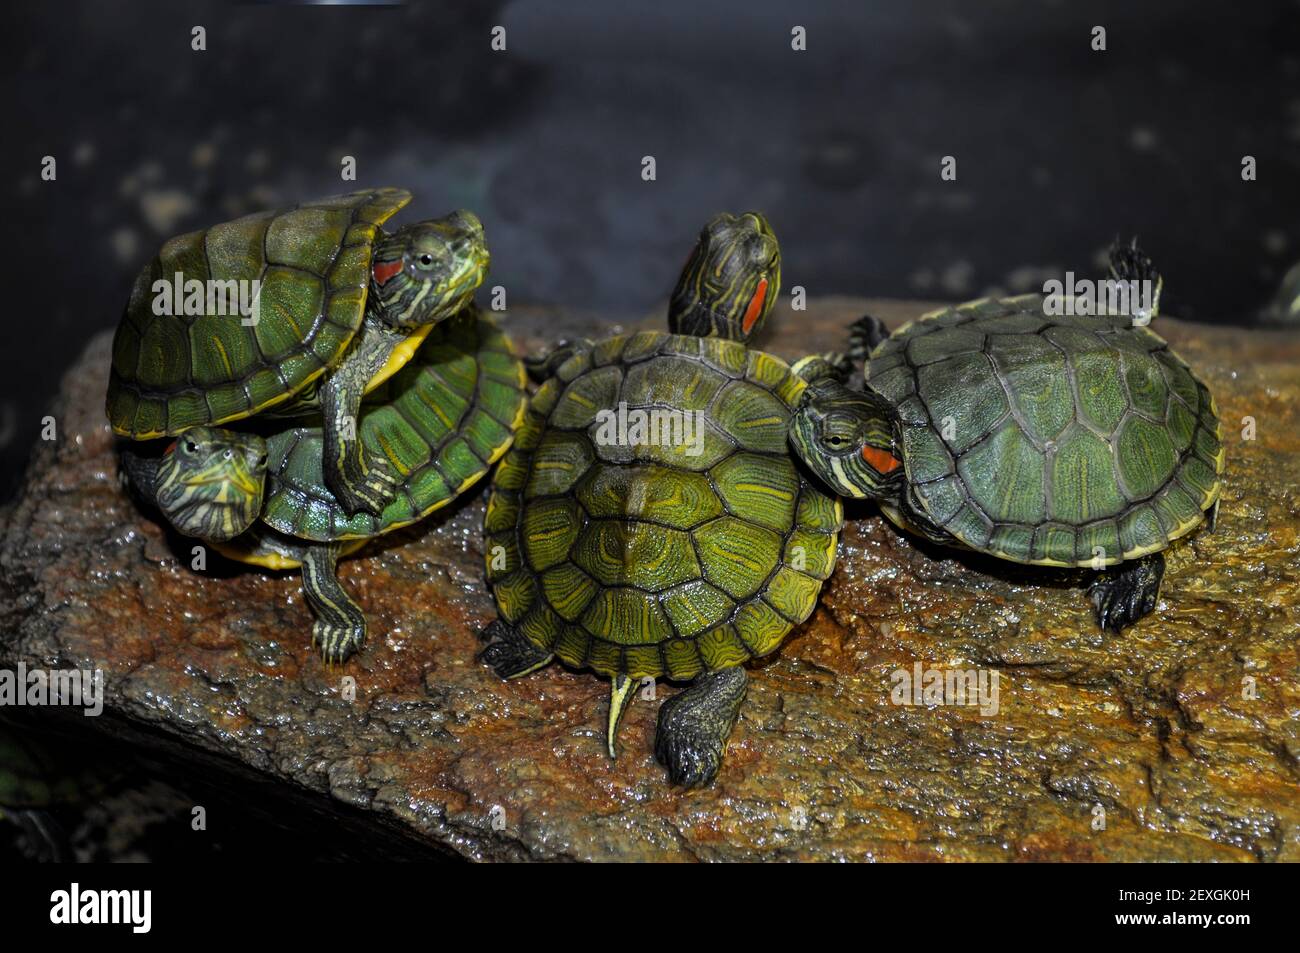 Red-eared turtle in freshwater aquarium Stock Photo